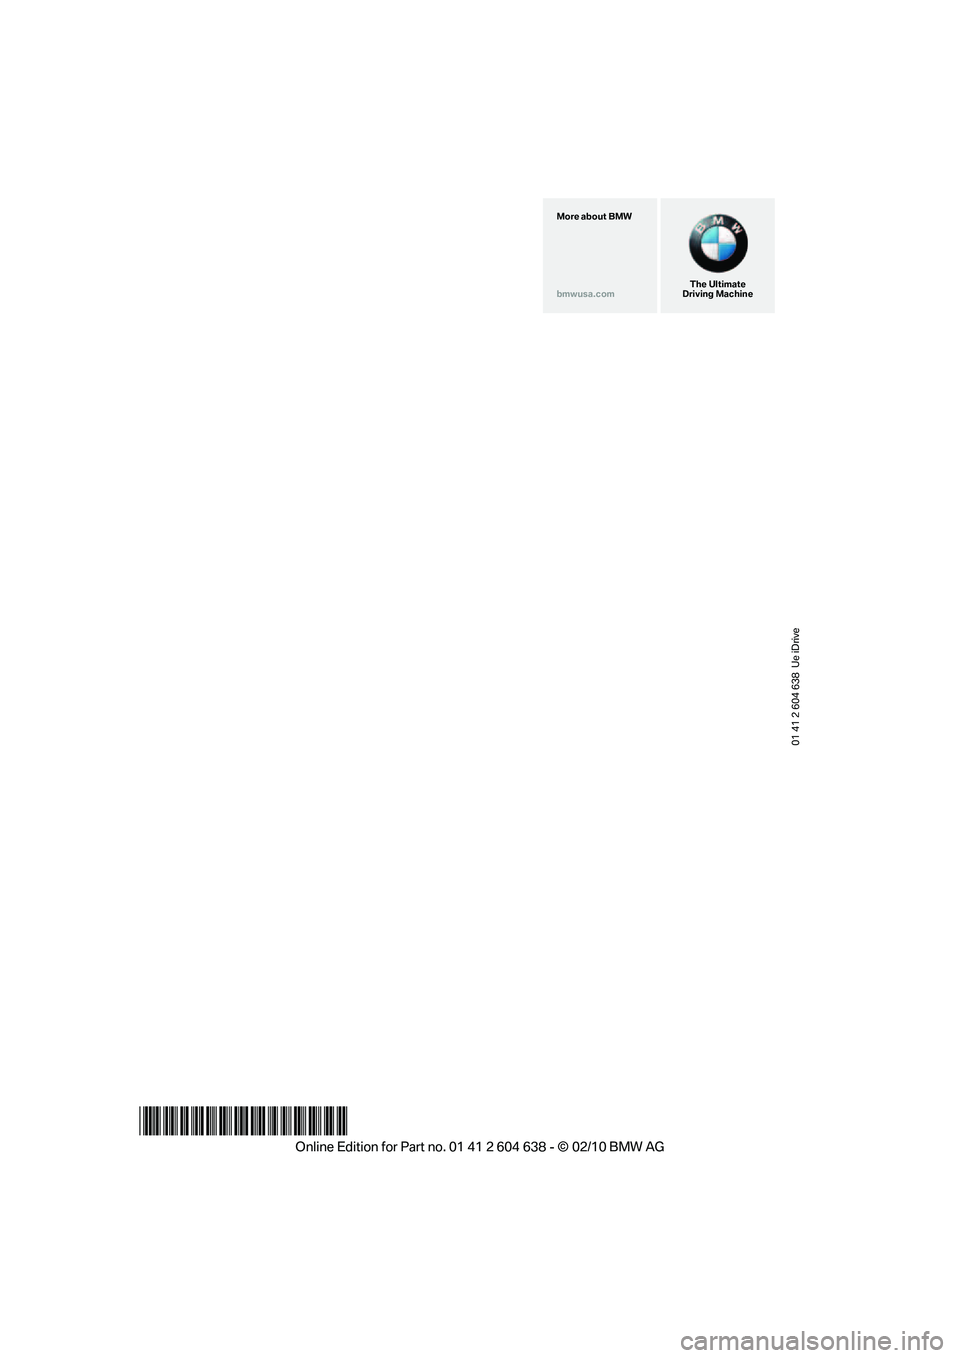 BMW M3 CONVERTIBLE 2011  Owners Manual 01 41 2 604 638  Ue iDrive
*BL2604638007*
The Ultimate
Driving Machine More about BMW
bmwusa.com 